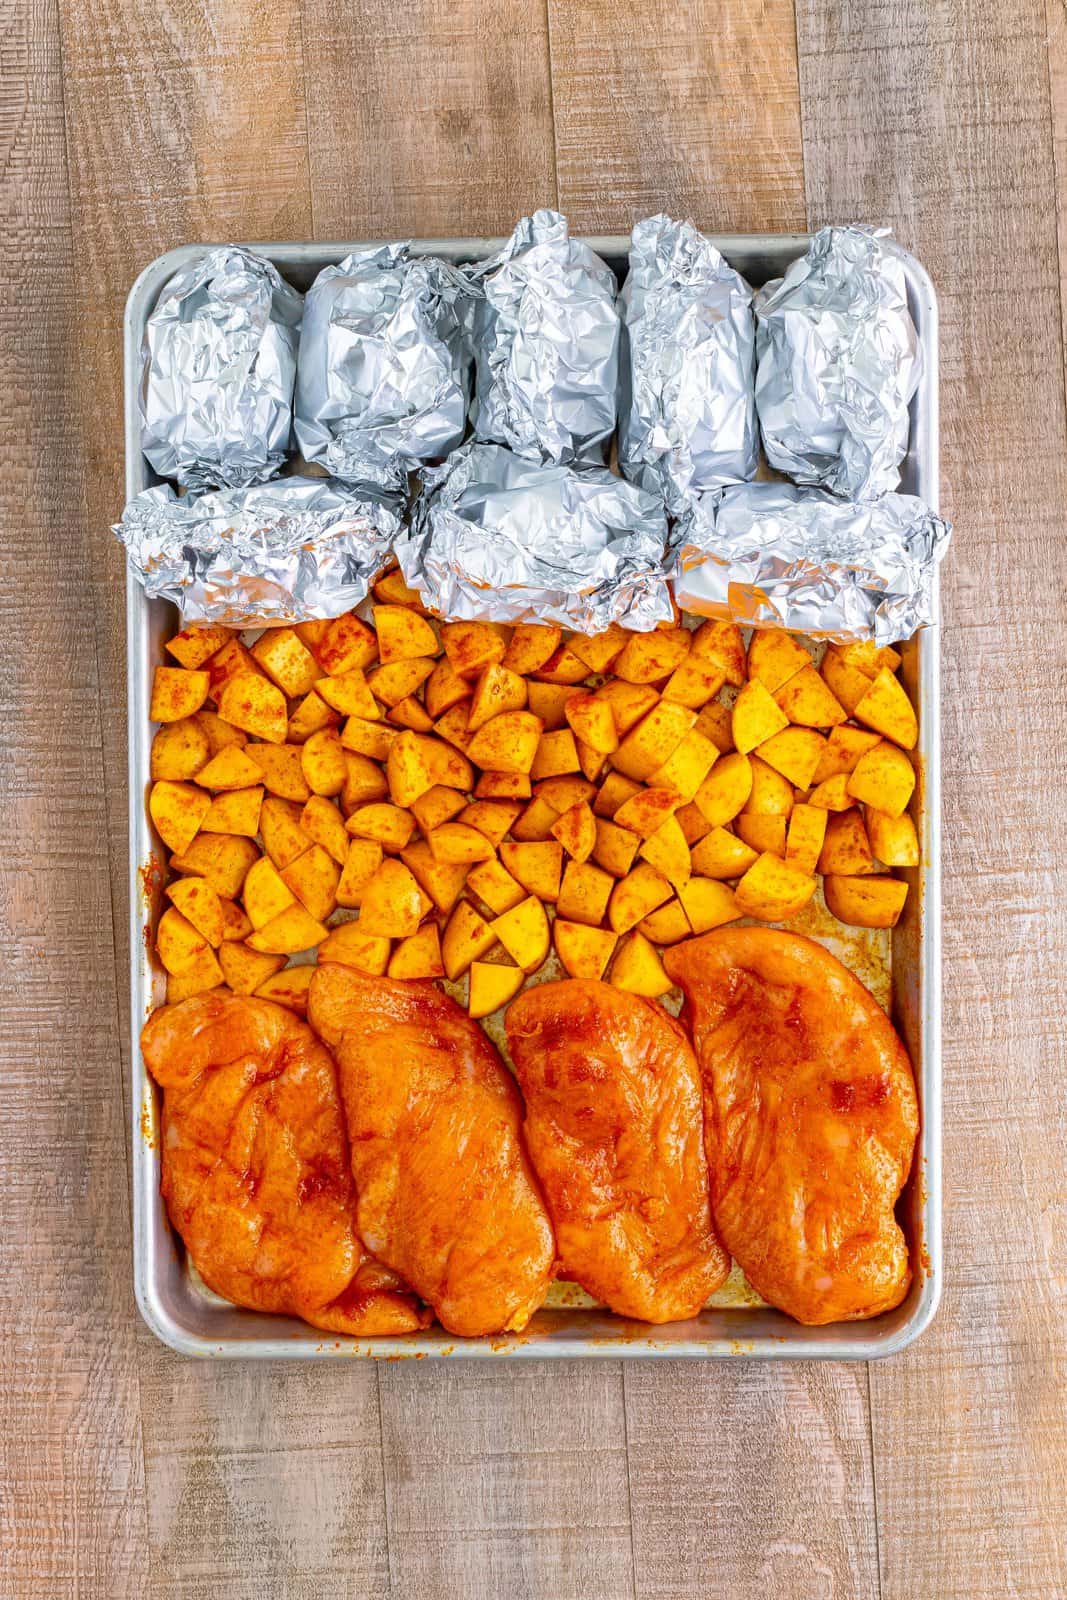 A sheet pan with seasoned chicken, diced potatoes, and aluminum foil covered corn on the cob.